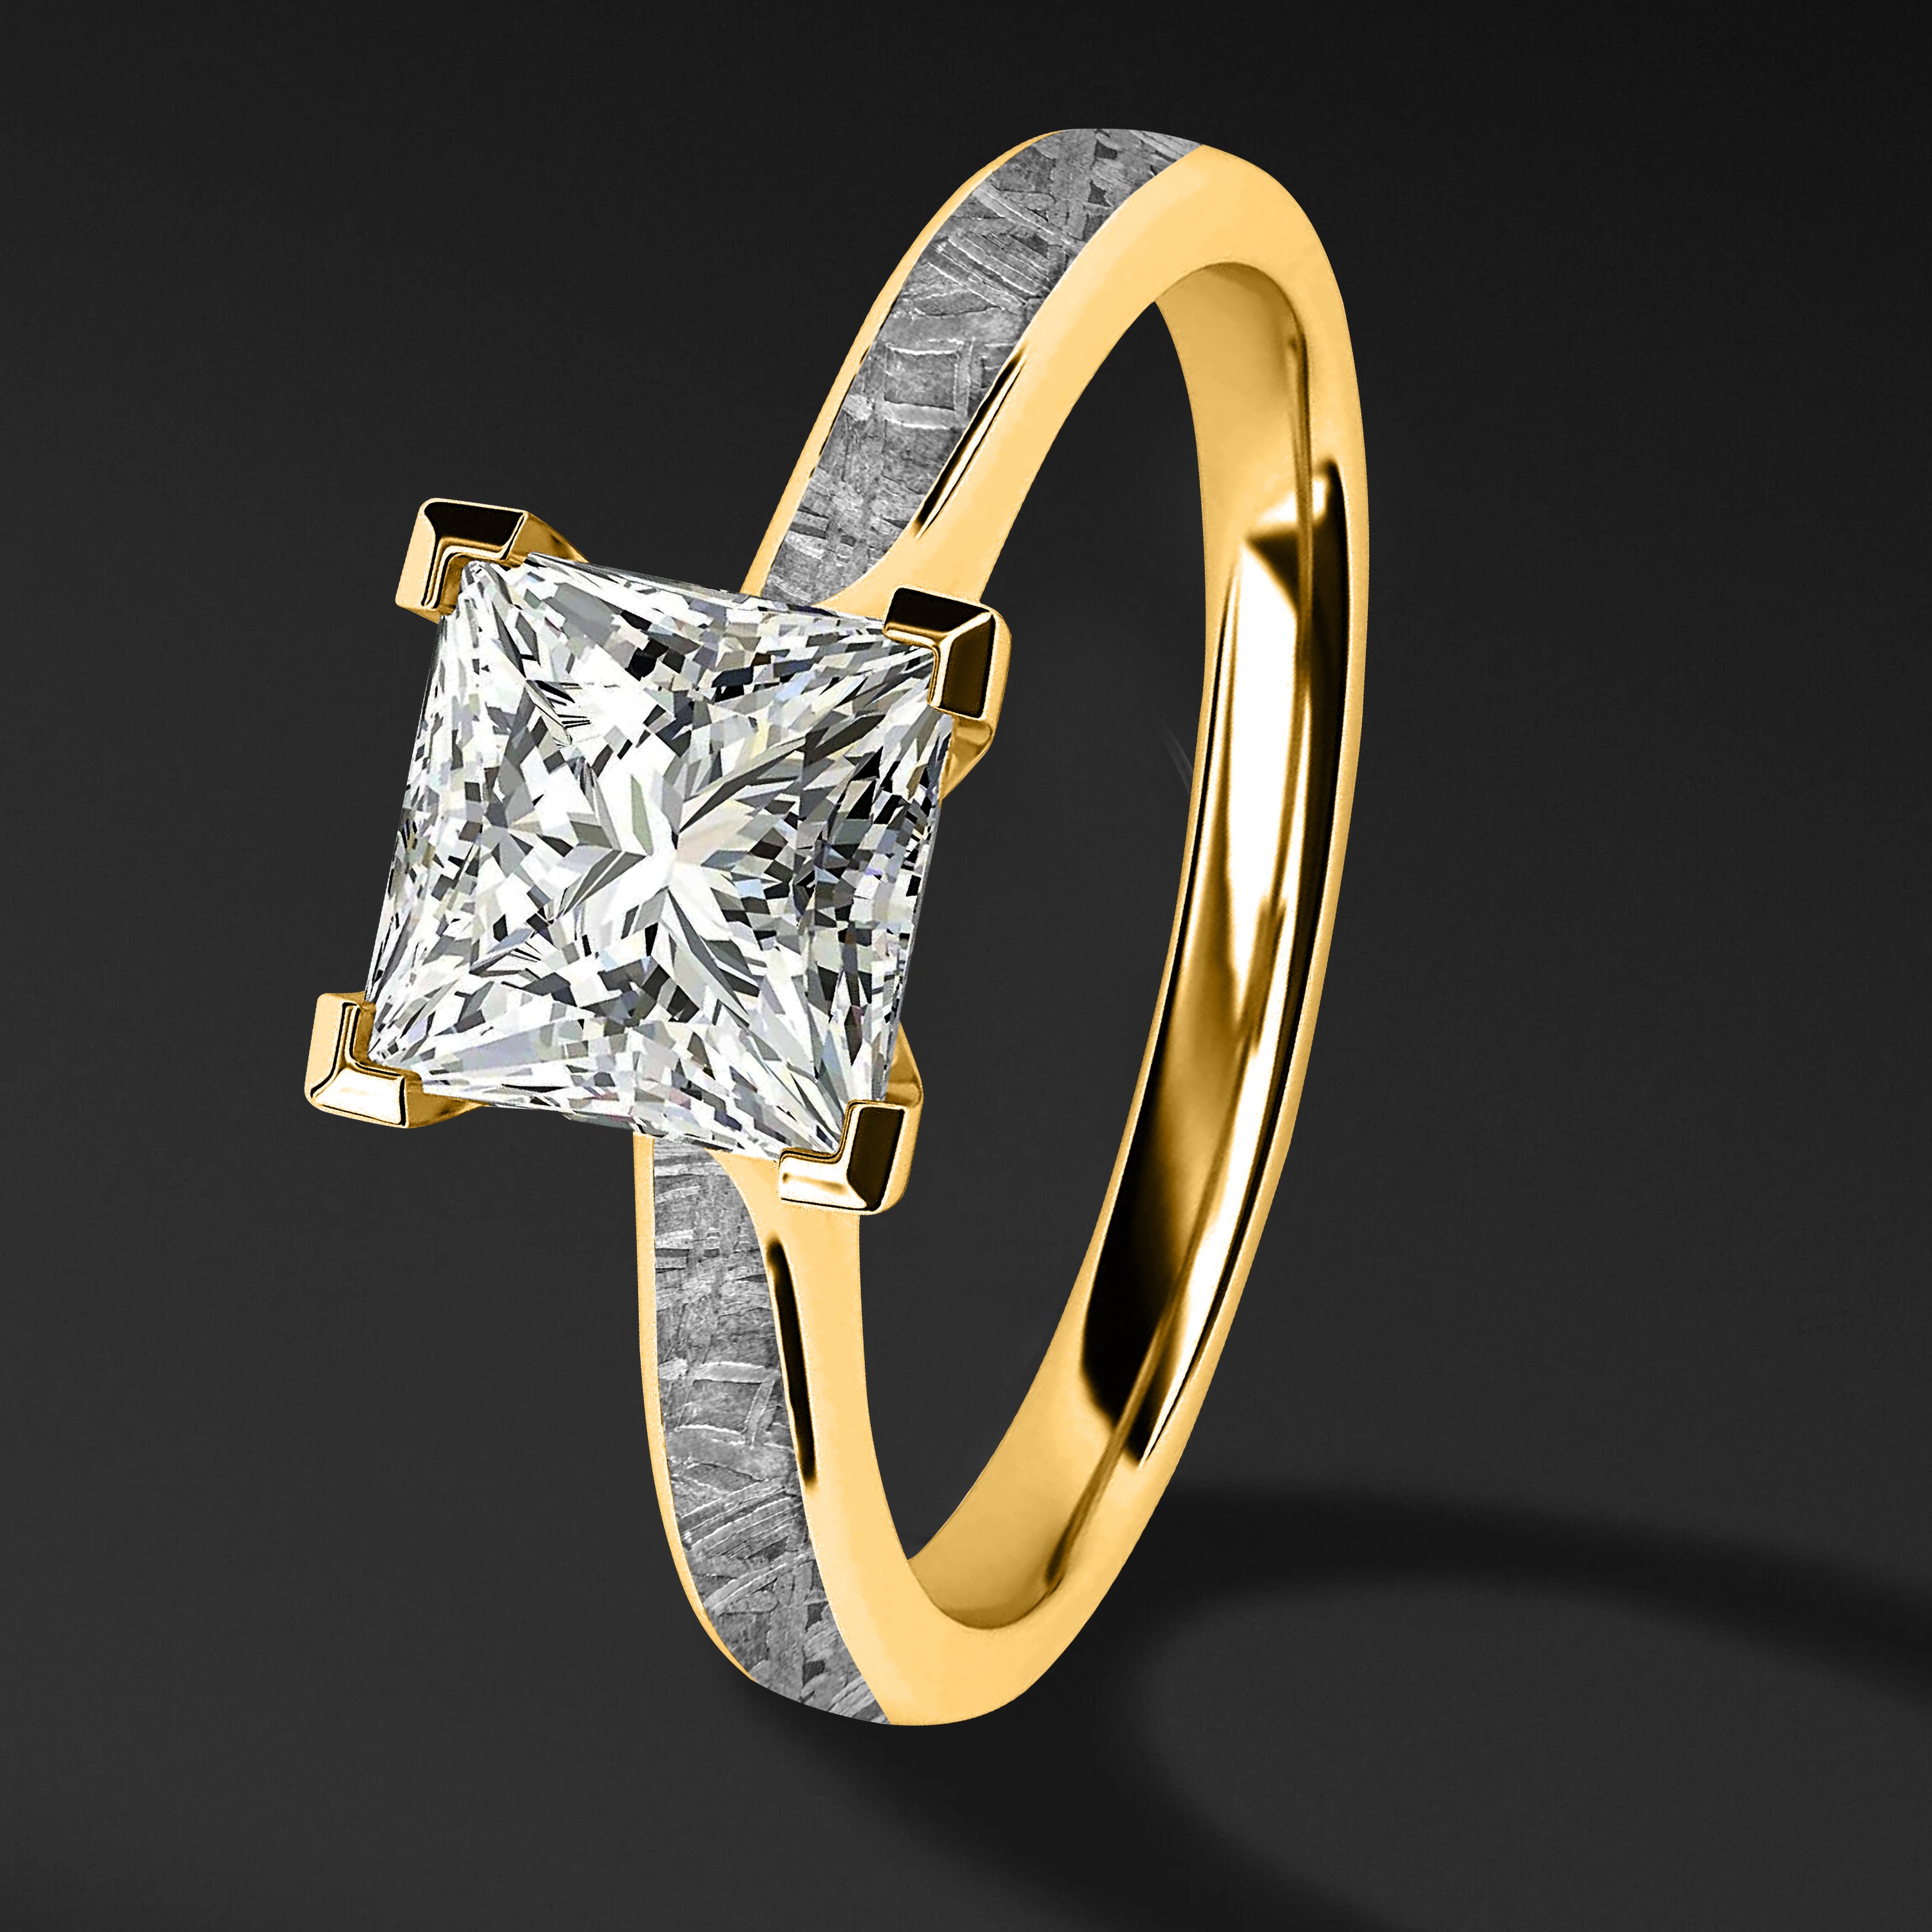 Golden Skyfall - Meteorite Engagement Ring 14K Gold & Moissanite - Gift from the Skies for your Beloved. Made to order.